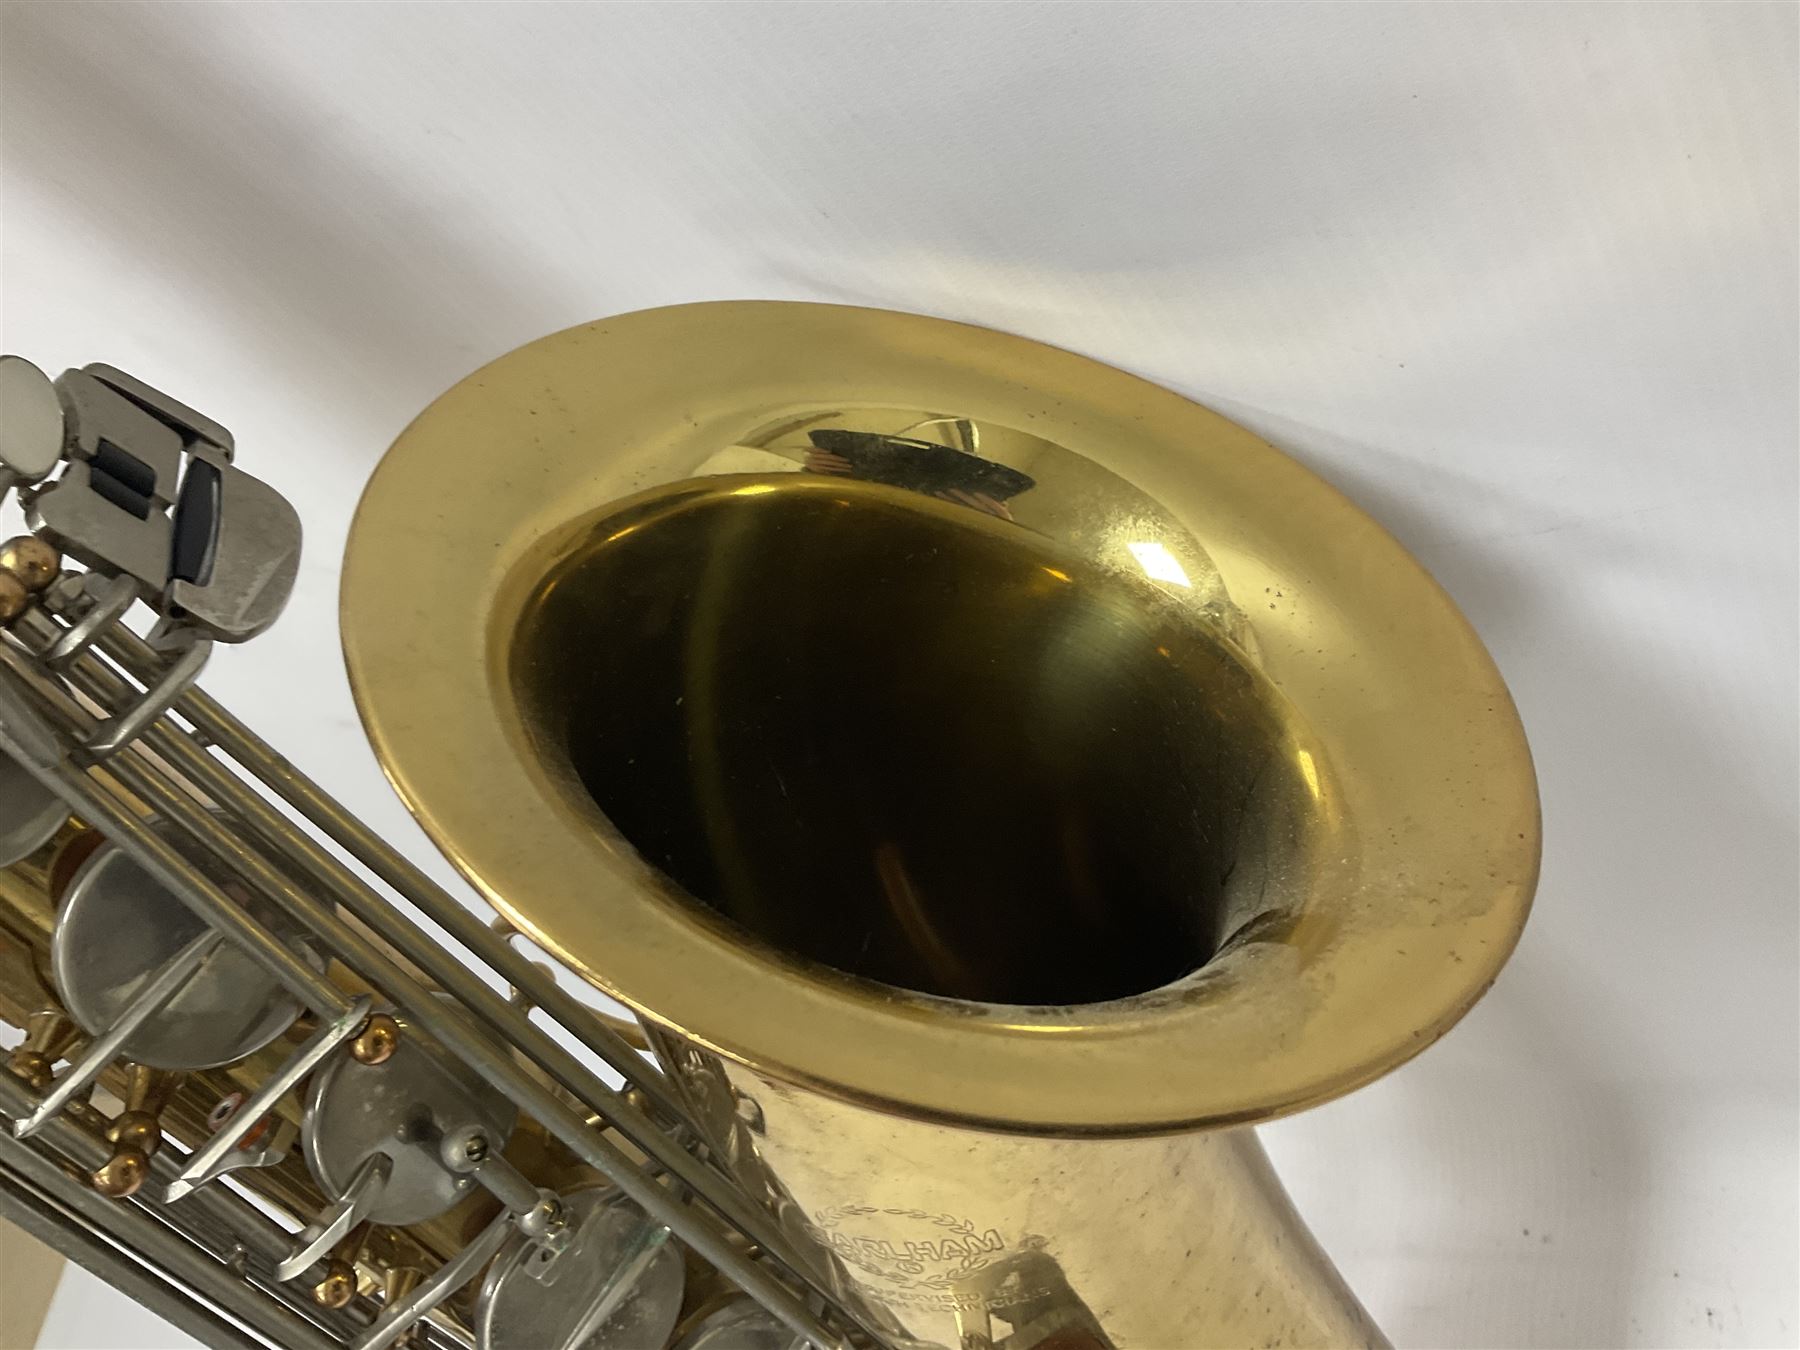 Earlham Tenor saxophone with mouthpiece in a fitted velvet lined hard case - Image 6 of 26